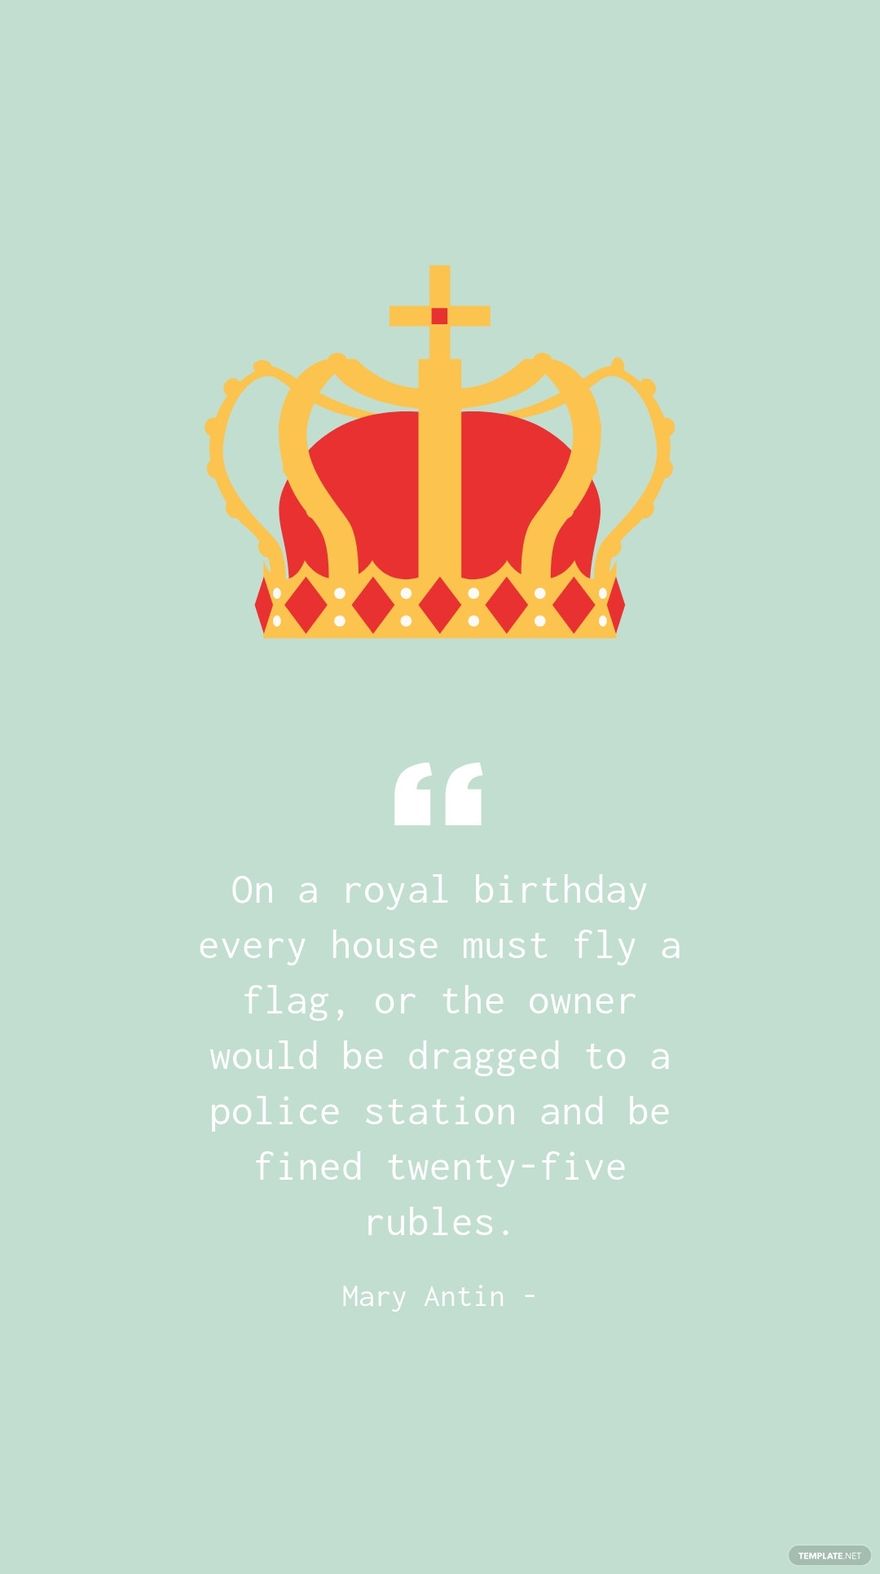 Mary Antin - On a royal birthday every house must fly a flag, or the owner would be dragged to a police station and be fined twenty-five rubles. in JPG